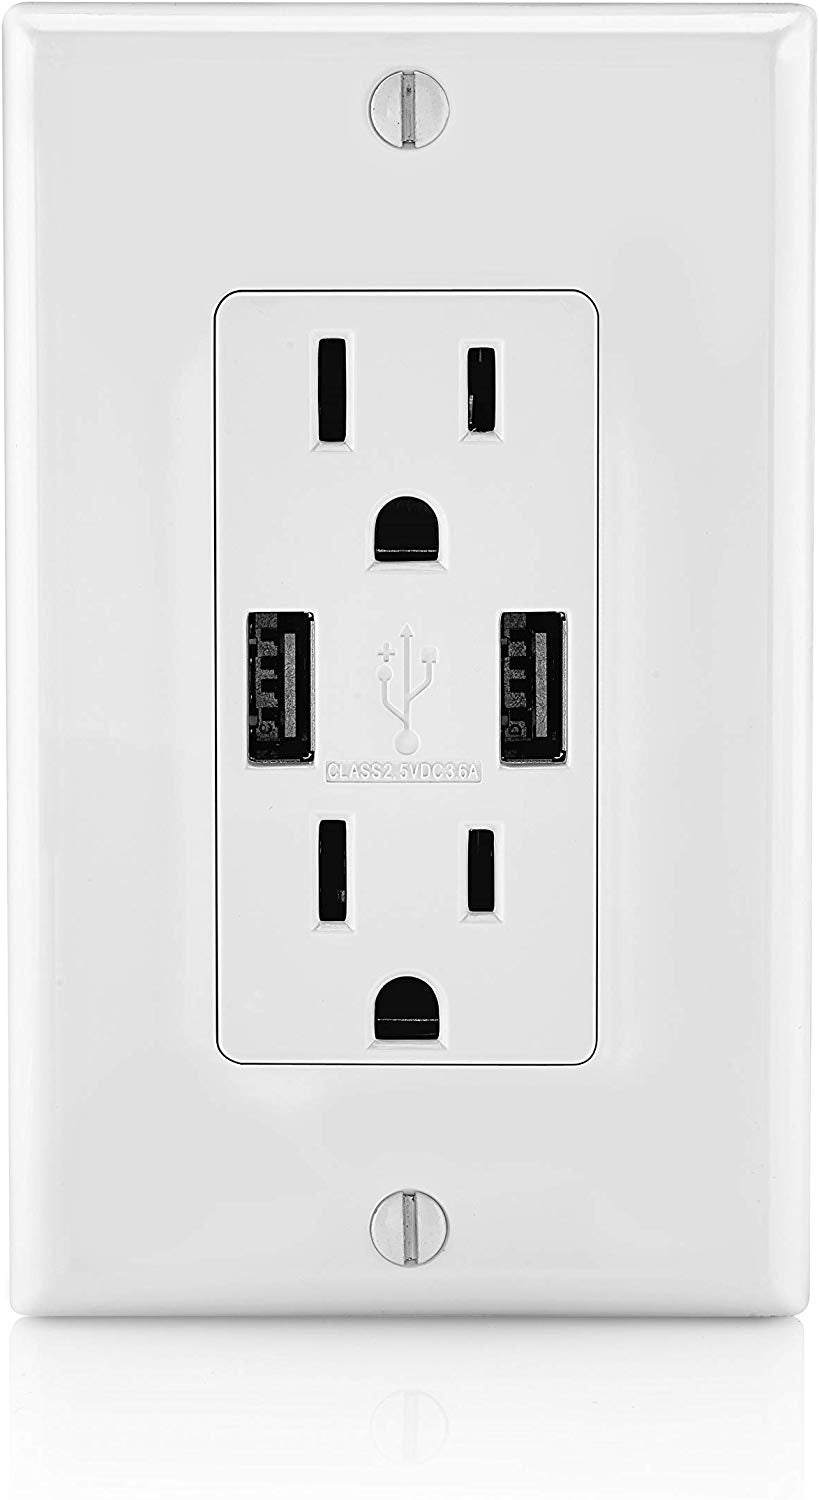 Leviton T5632-2Pk USB Charger/Tamper-Resistant Duplex Receptacle, 15-Amp, 2-Pack, White(wall plates excluded) - Consavvy